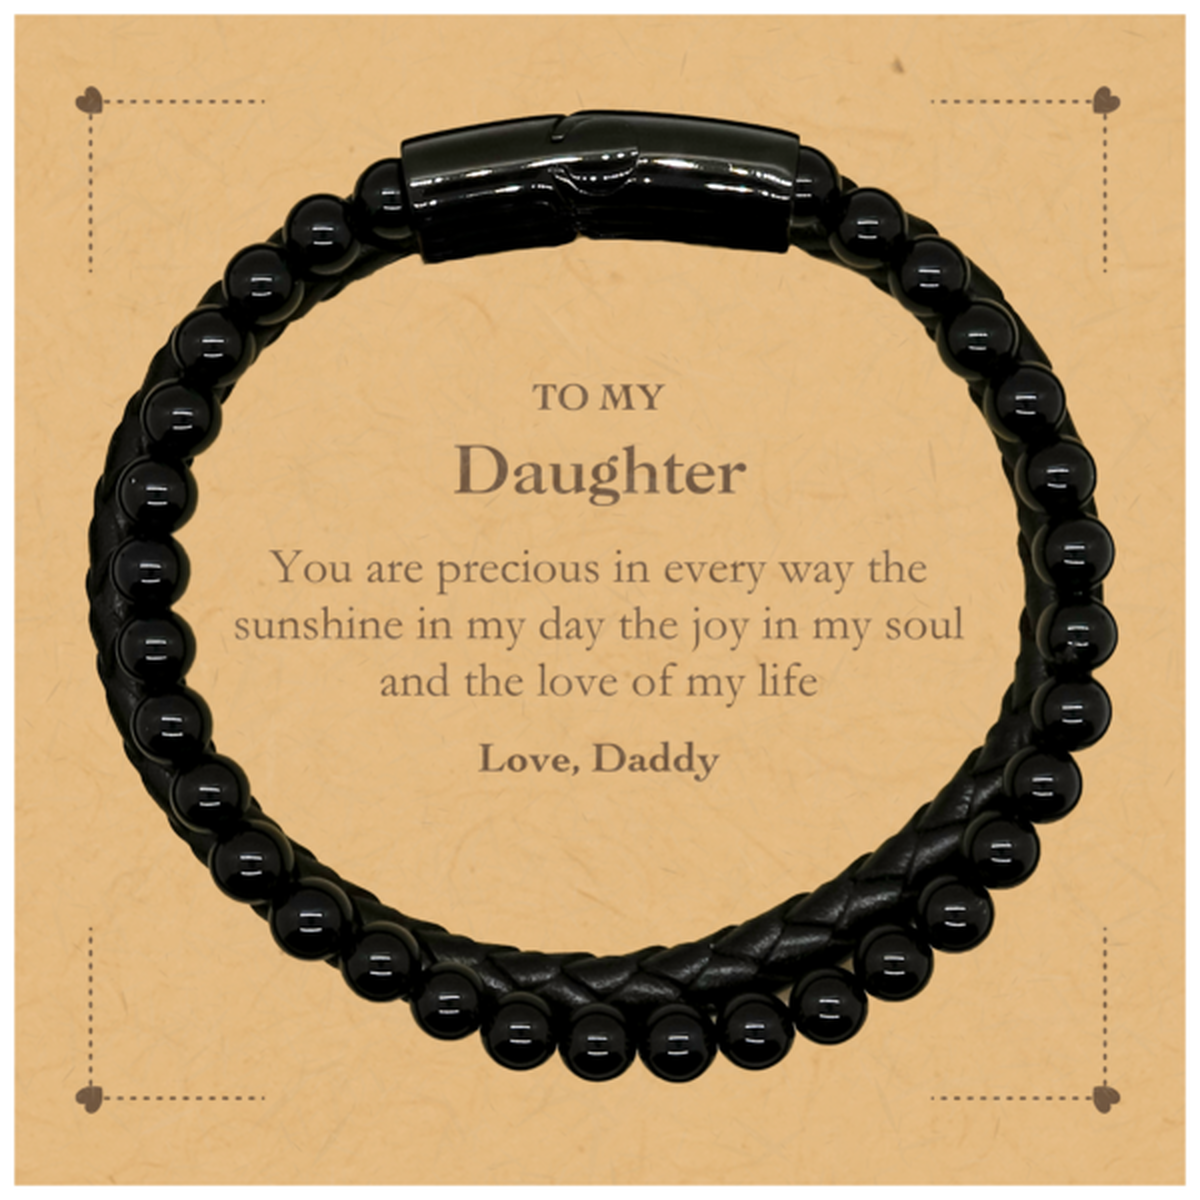 Graduation Gifts for Daughter Stone Leather Bracelets Present from Daddy, Christmas Daughter Birthday Gifts Daughter You are precious in every way the sunshine in my day. Love, Daddy